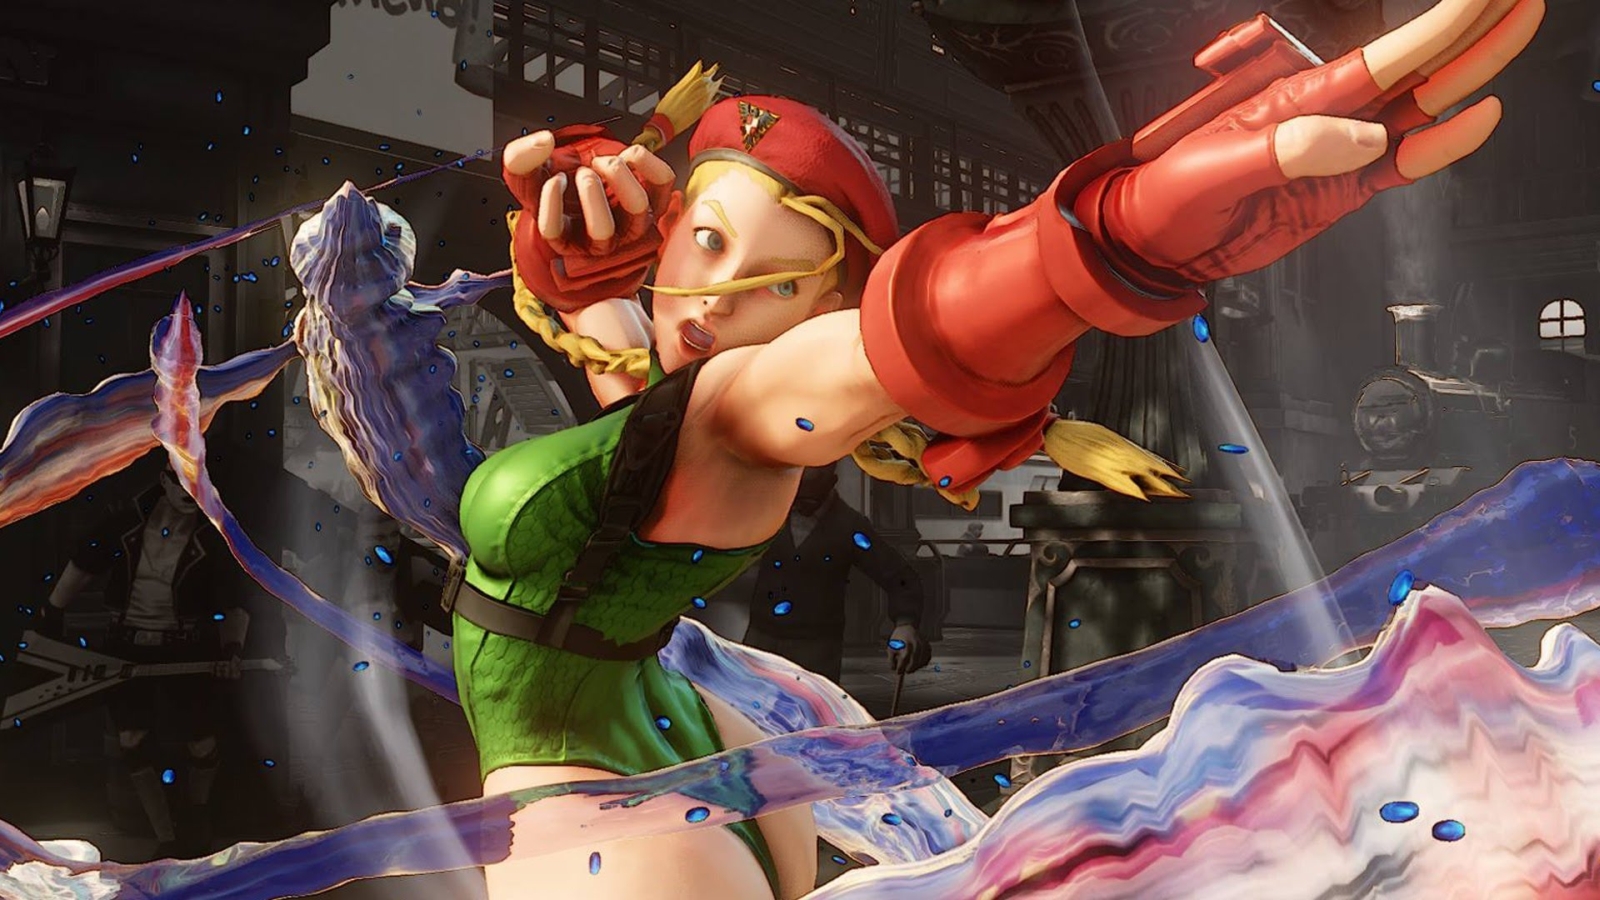 STREET FIGHTER V ARCADE EDITION COMING JANUARY 2018